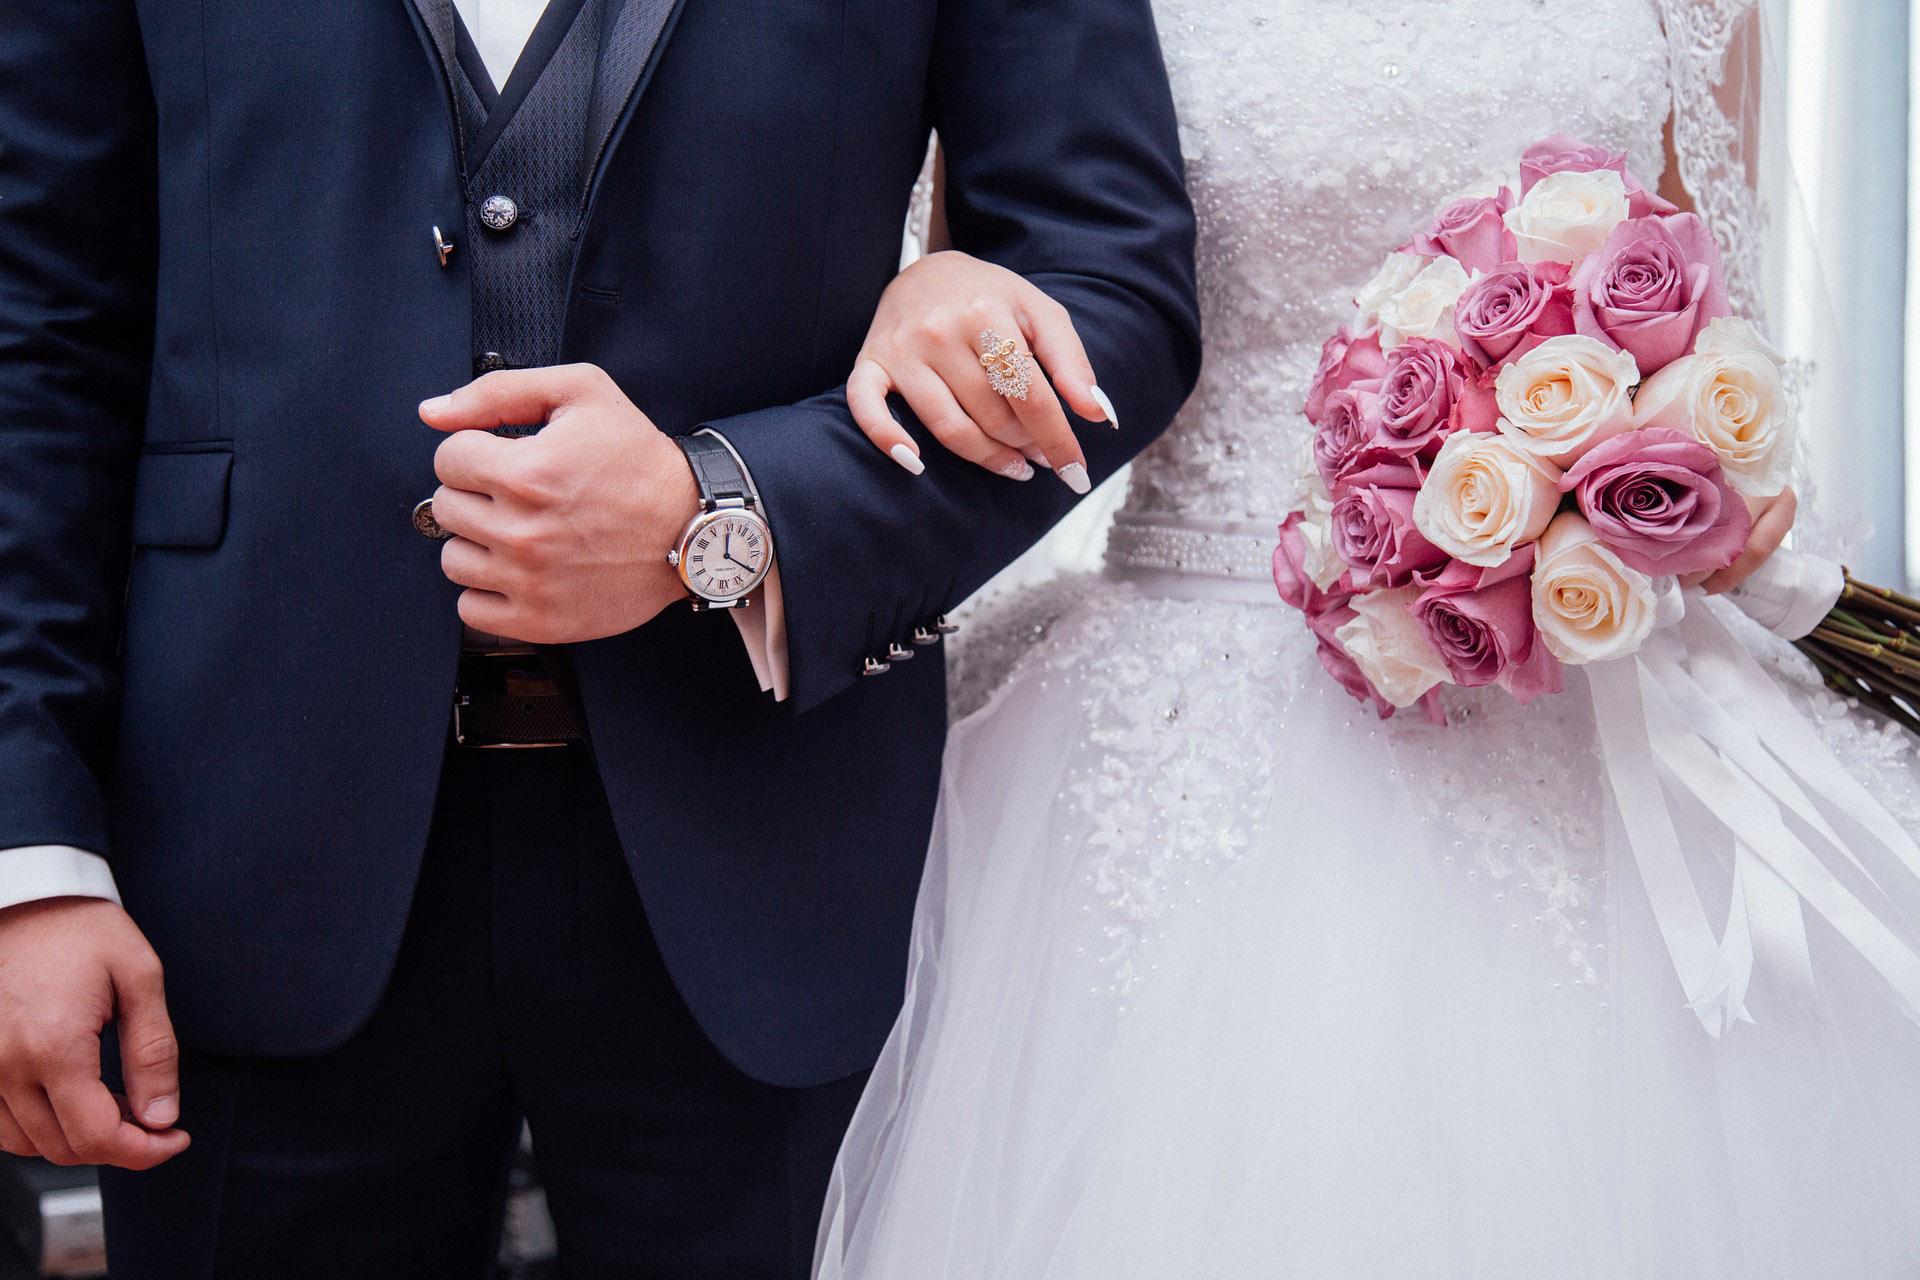 During phase four of Illinois’ reopening plan, gatherings, including weddings, are limited to up to 50 people, according to state guidelines. (StockSnap / Pixabay) 